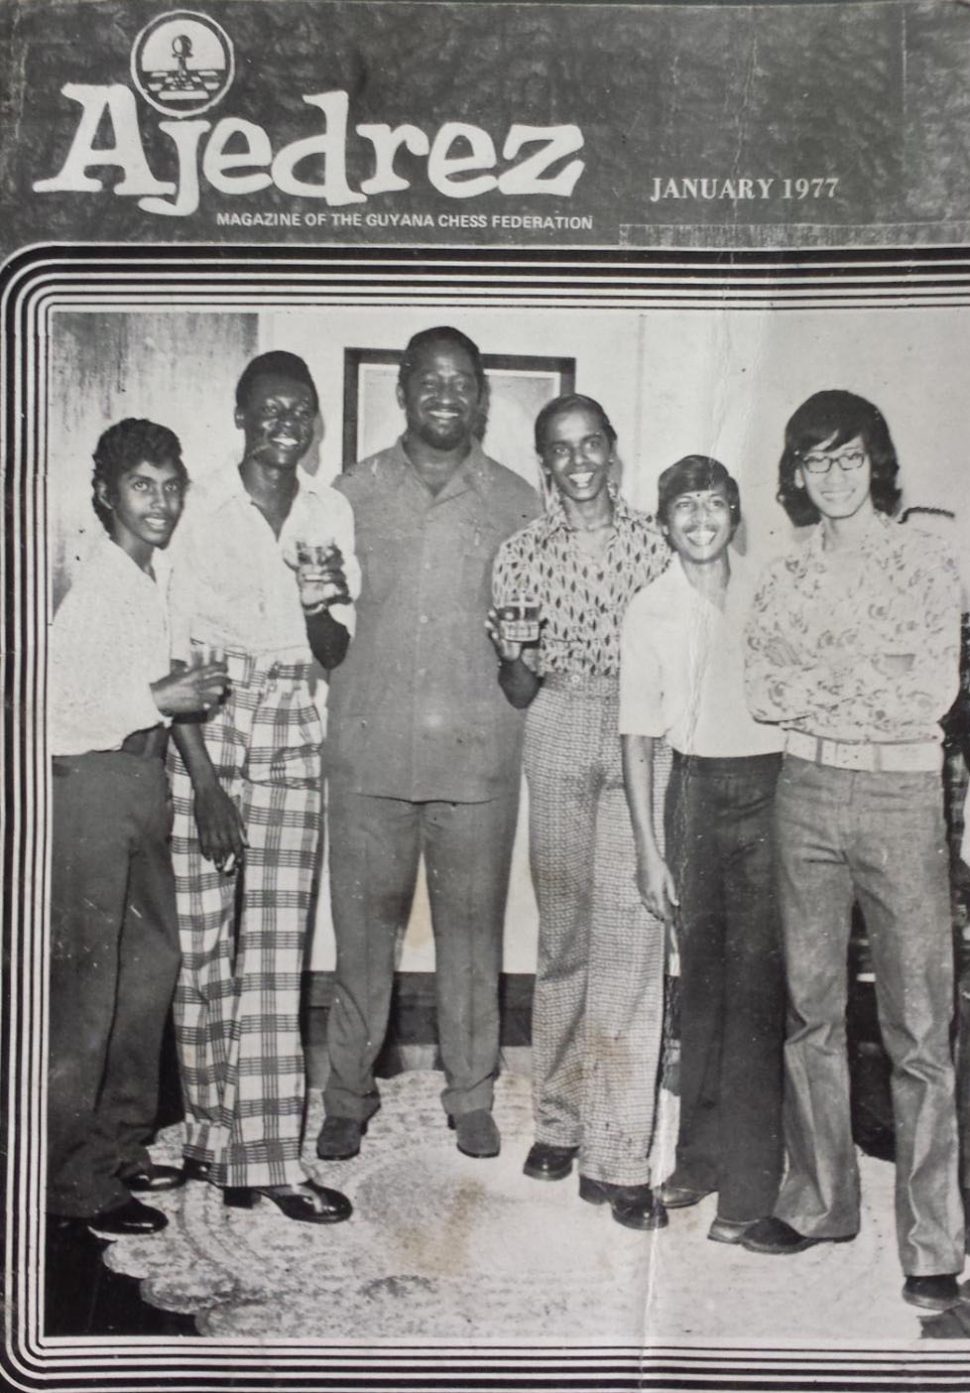 Flashback! This was the cover of the January 1977 chess magazine Ajedrez which was published by the Guyana Chess Federation. President of the federation Burnham is at centre. The occasion was a cocktail reception at the Residence for the first presentation of the Burnham Trophy to the winner of the National Chess Championship. From left are: Nigel Jagan, Wendell Jackman, Aftab Karimullah, Roy Khan and Michael Chan.  

